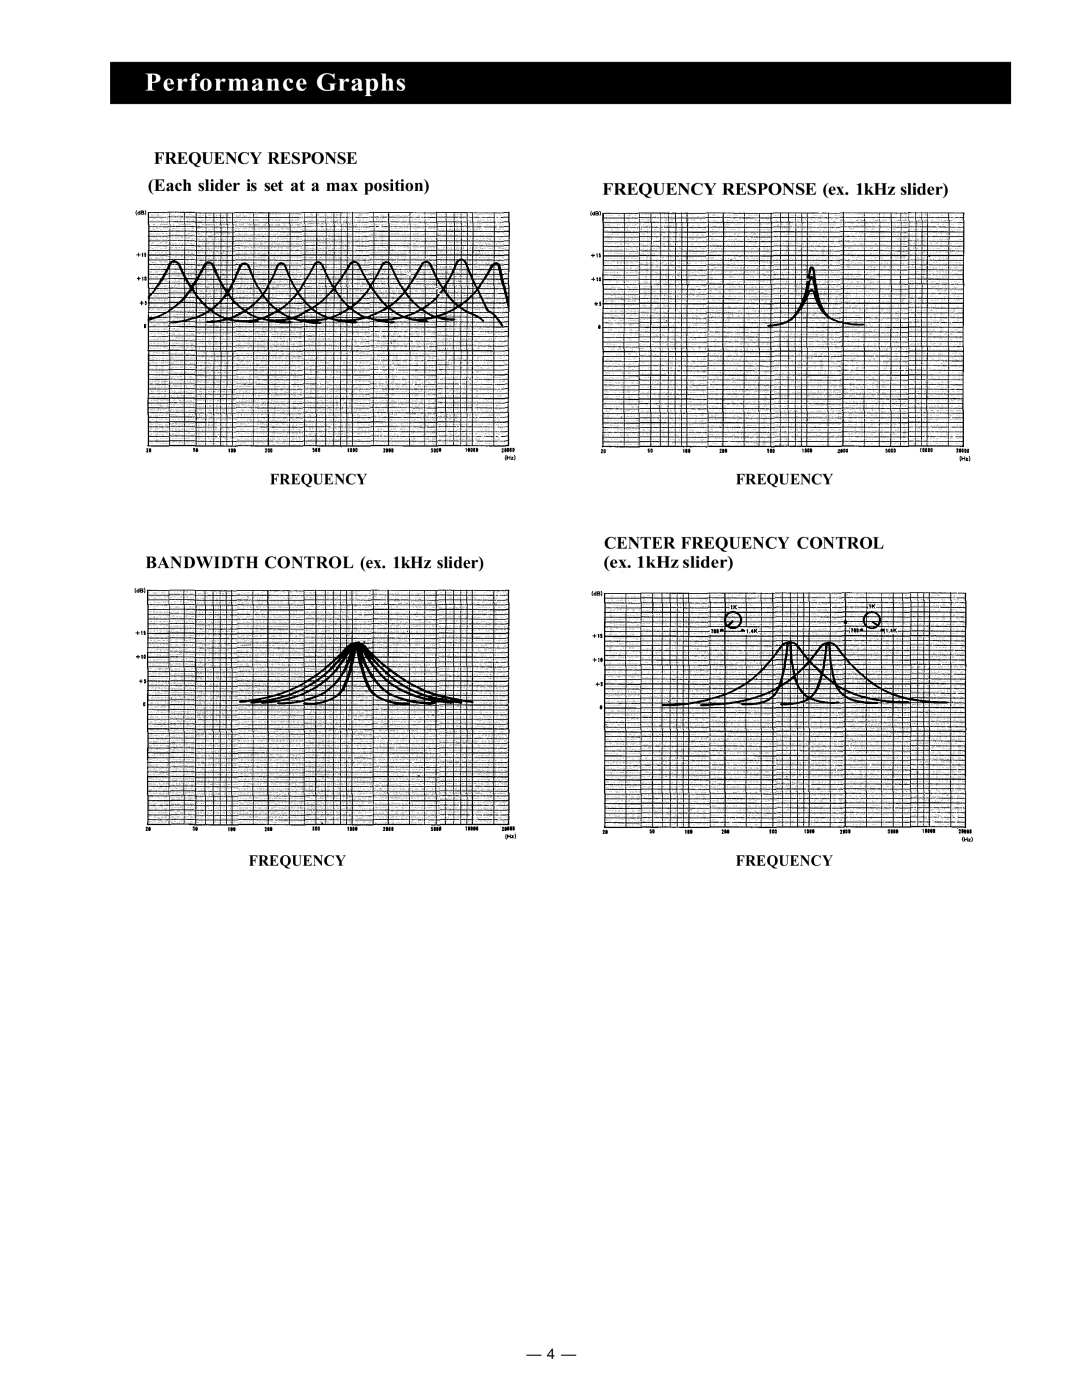 Viking Electronics E111 Performance Graphs, Frequency Response, Each slider is set at a max position, ex. 1kHz slider 